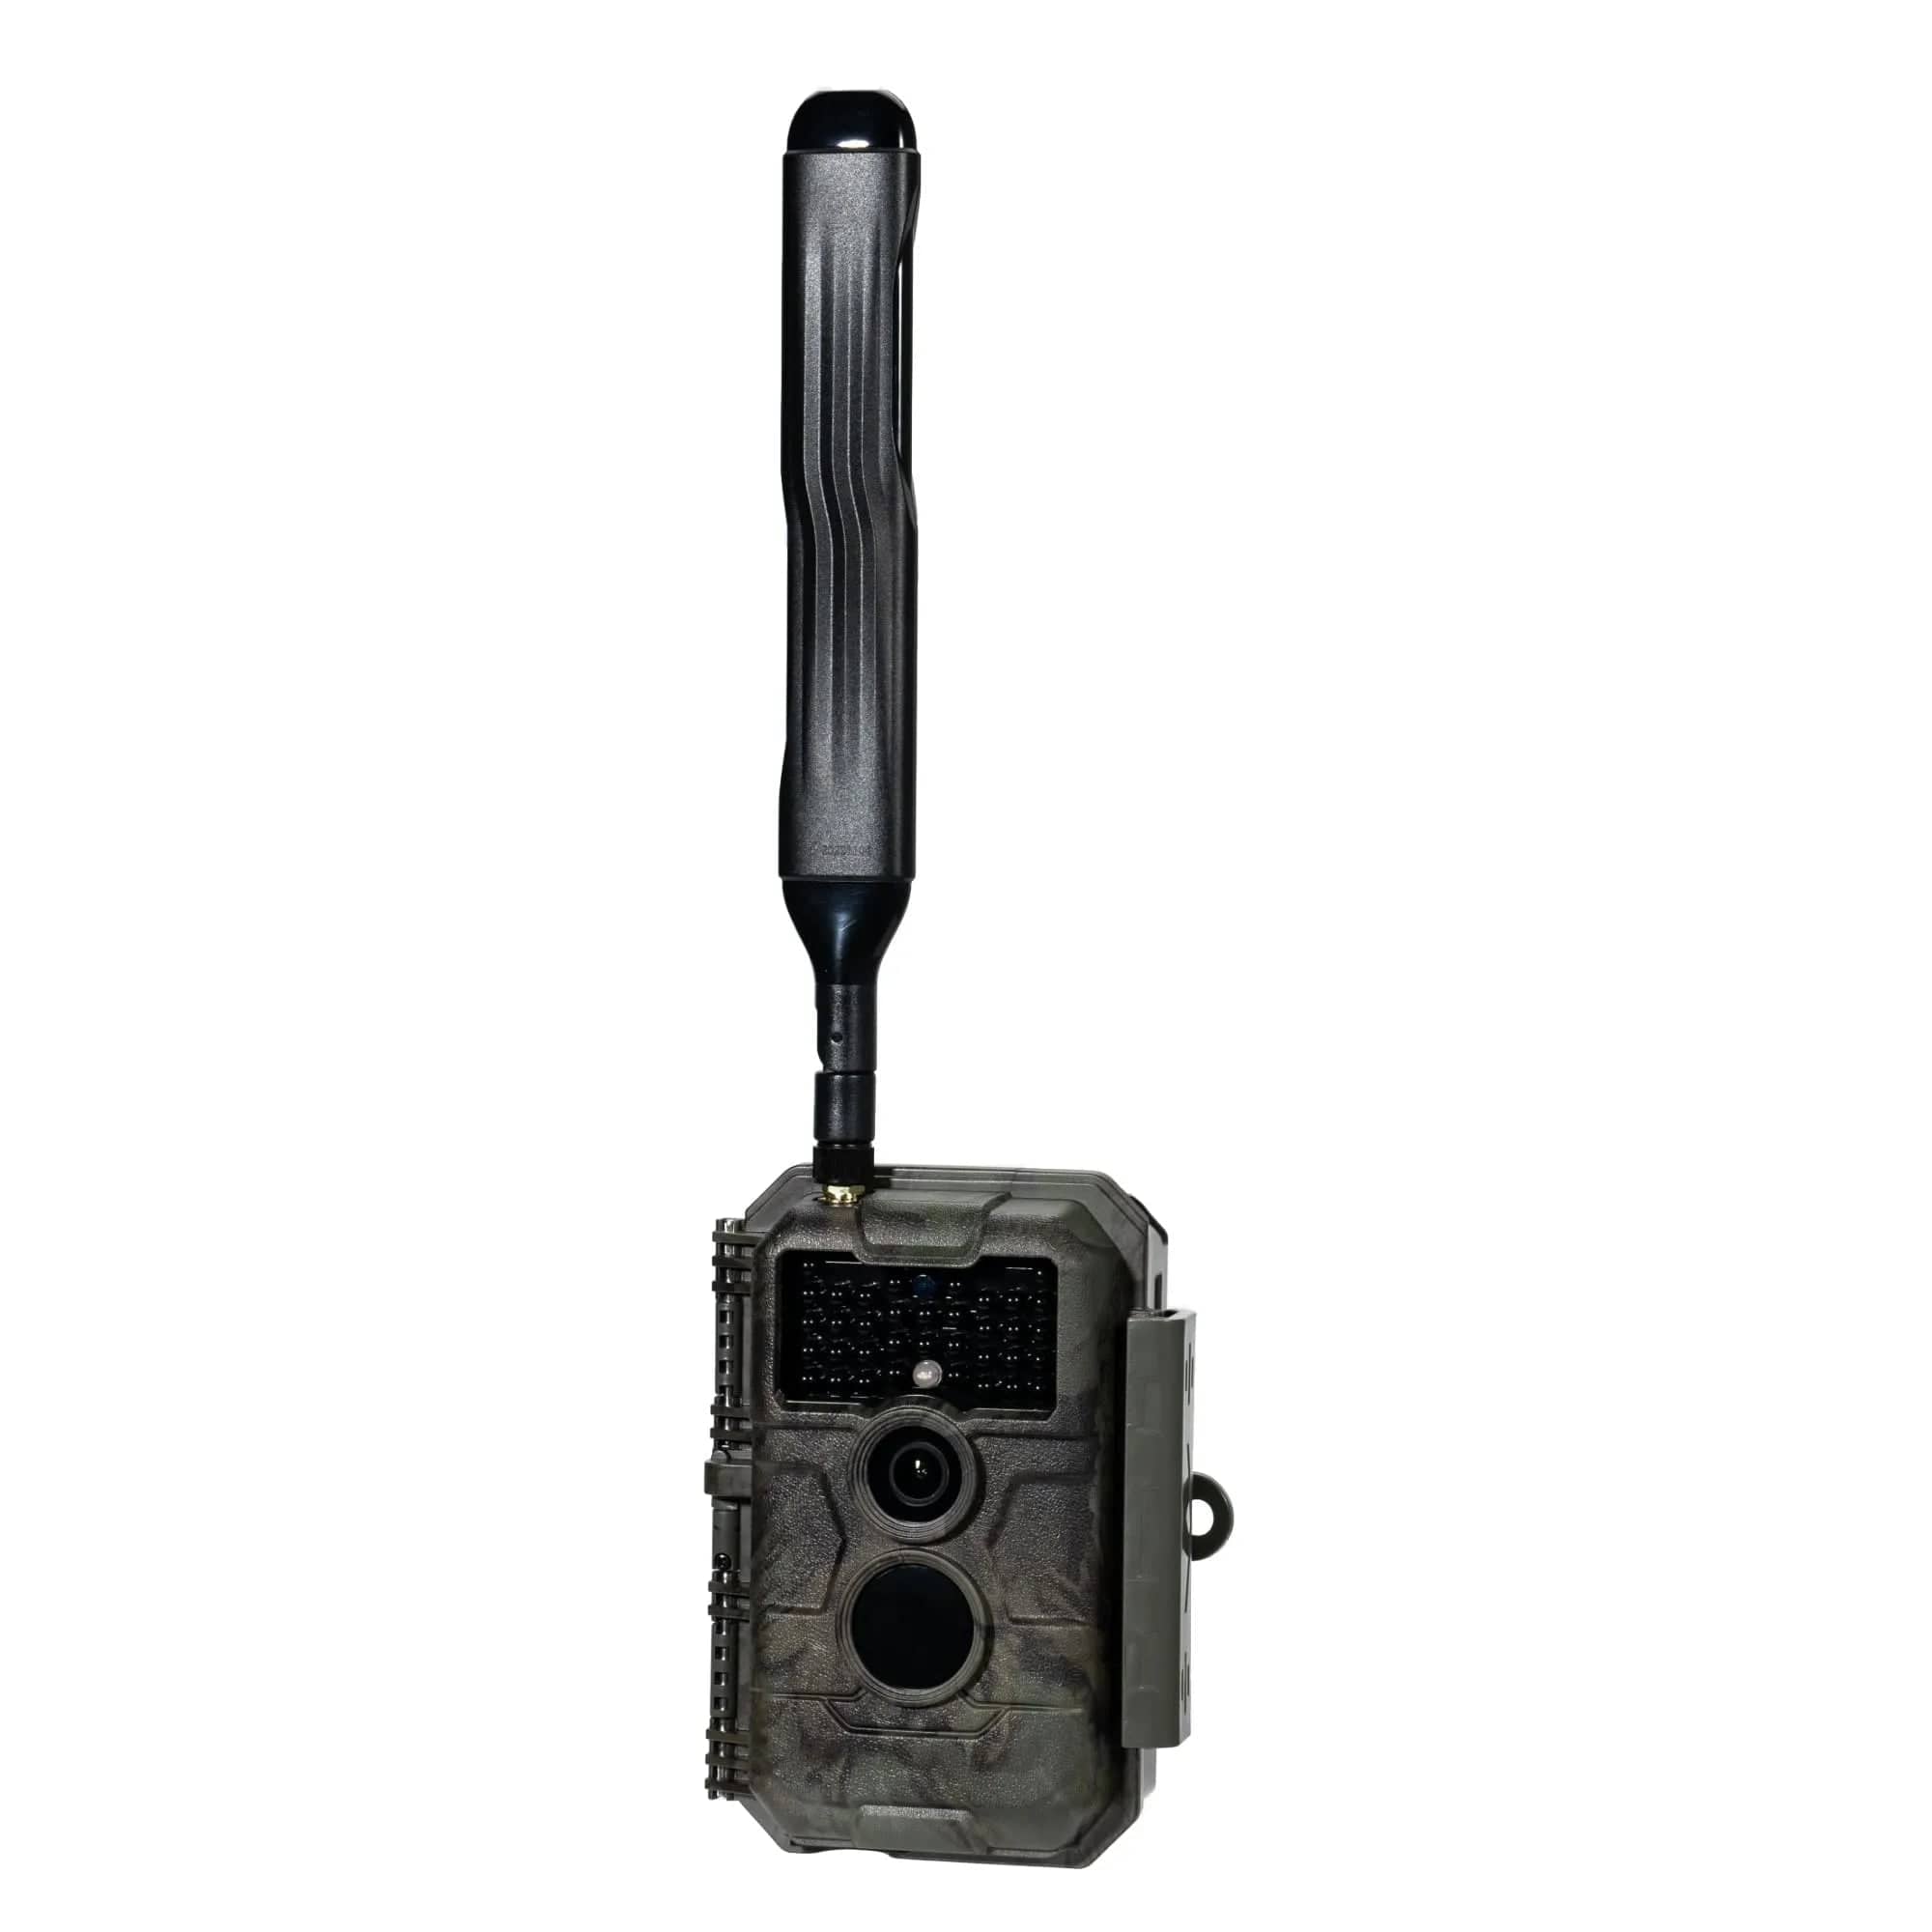 GardePro Cellular Trail Camera X20 Pre-Installed Contract SIM With Solar Panel